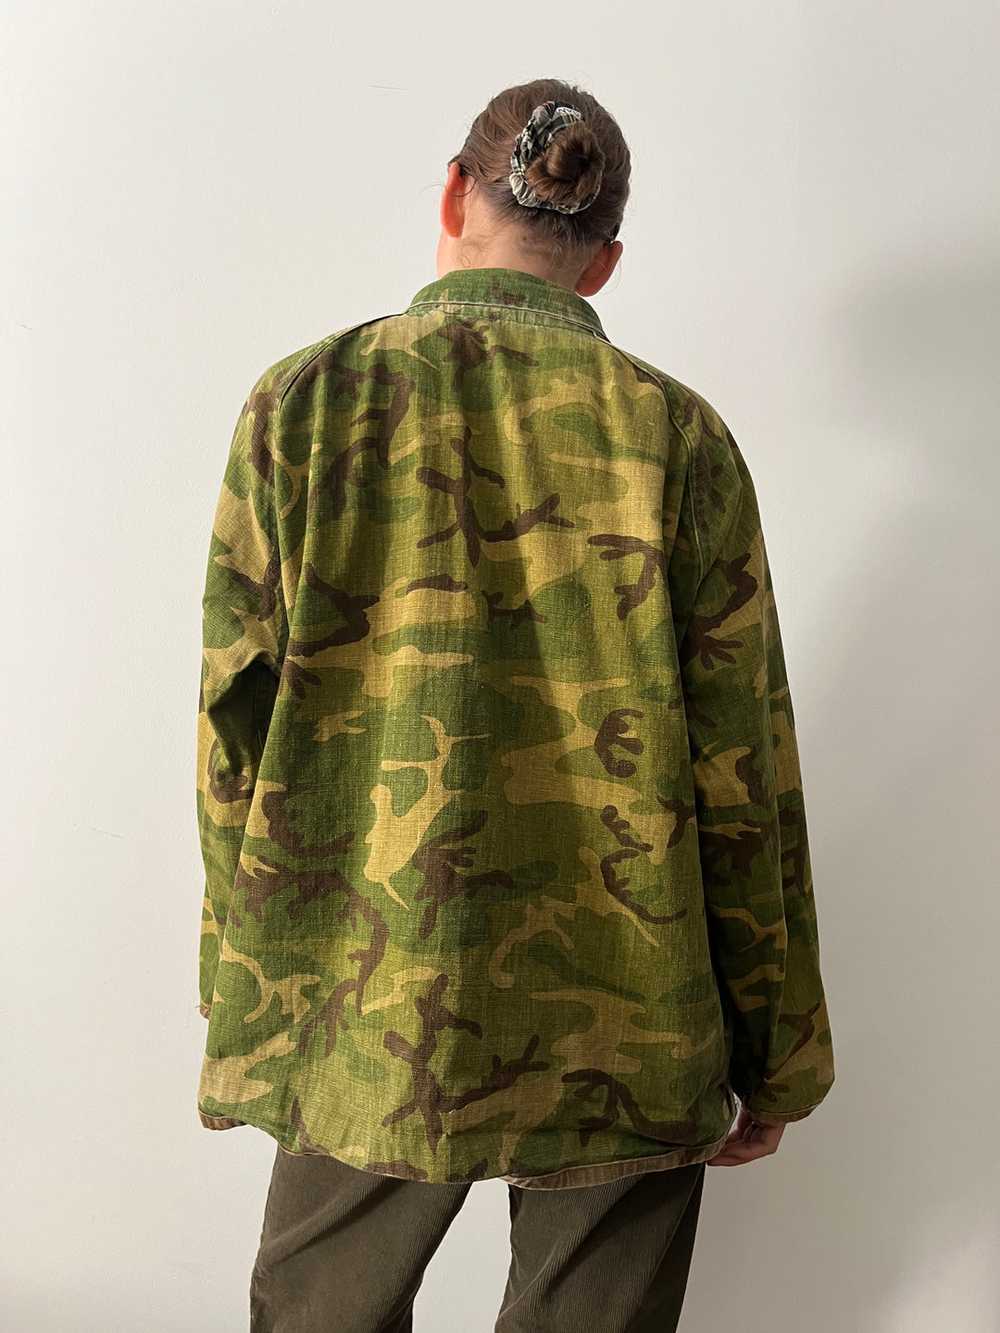 60s/70s Reversible Canvas Camo Hunting Jacket - image 6